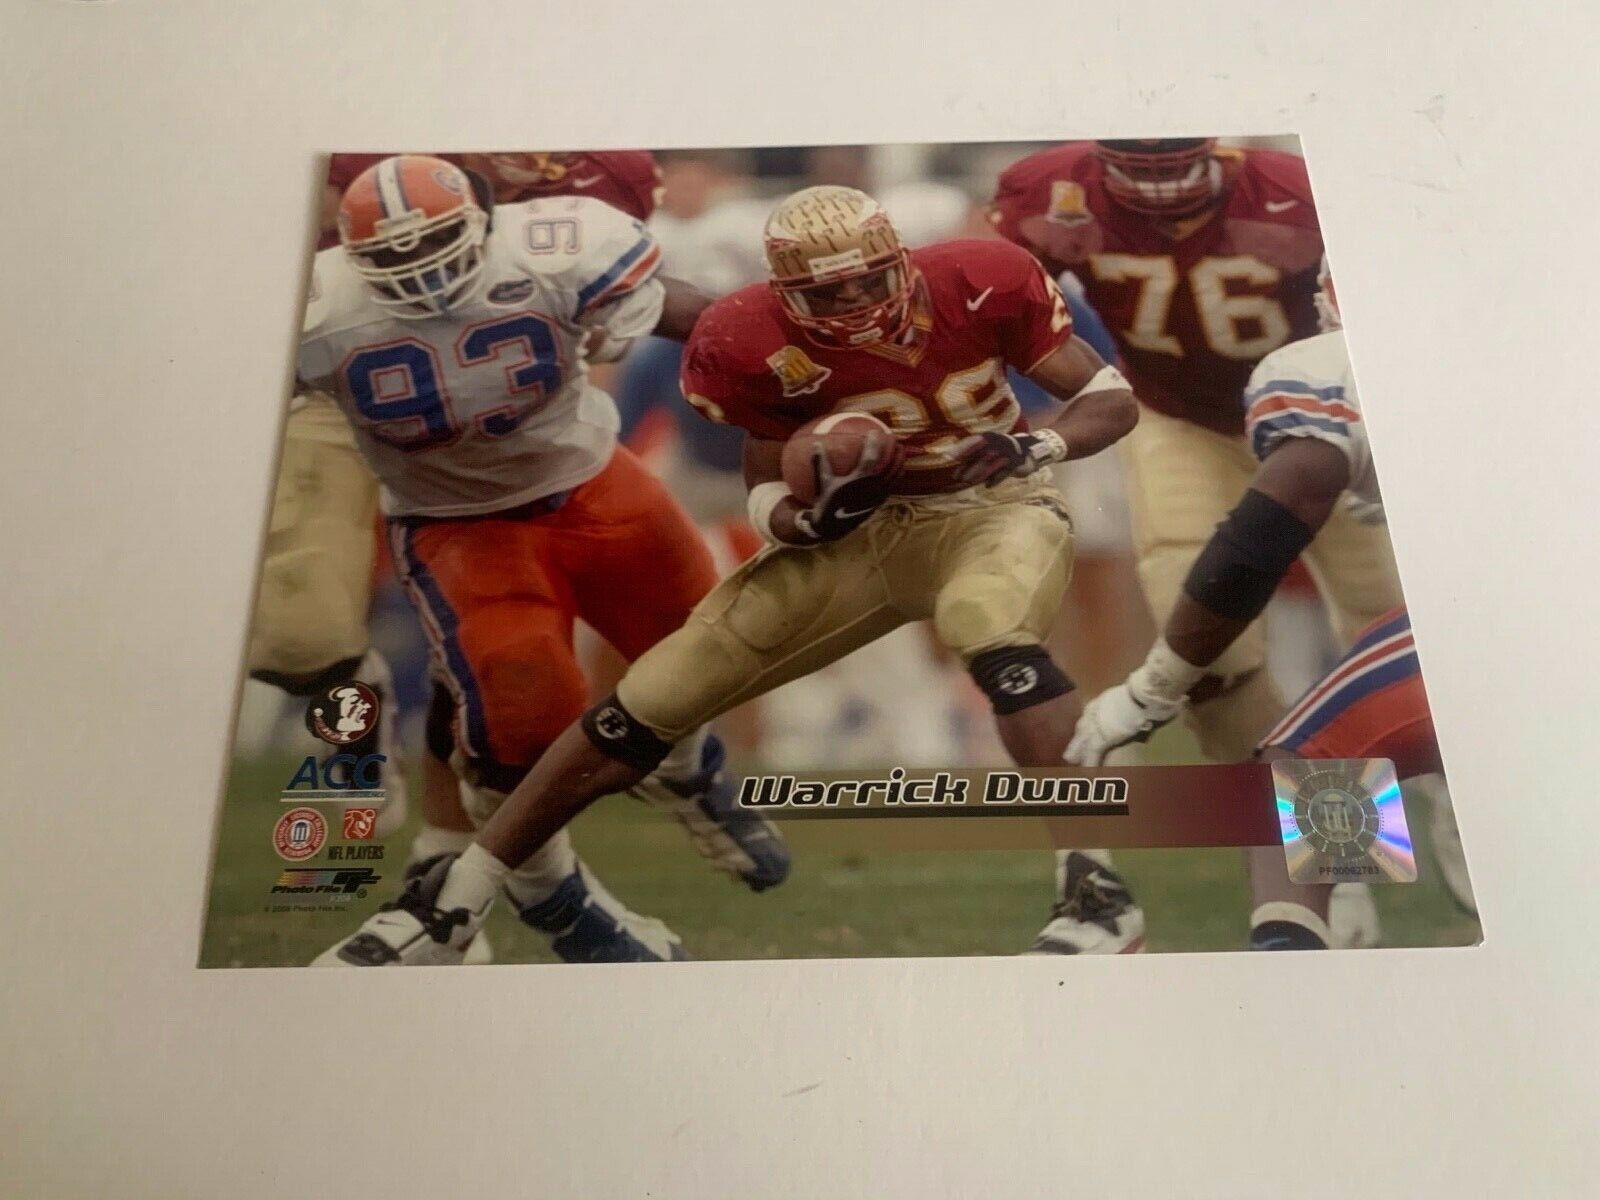 Warrick Dunn Florida State Seminoles 8x10 Color Photo with NFL Hologram